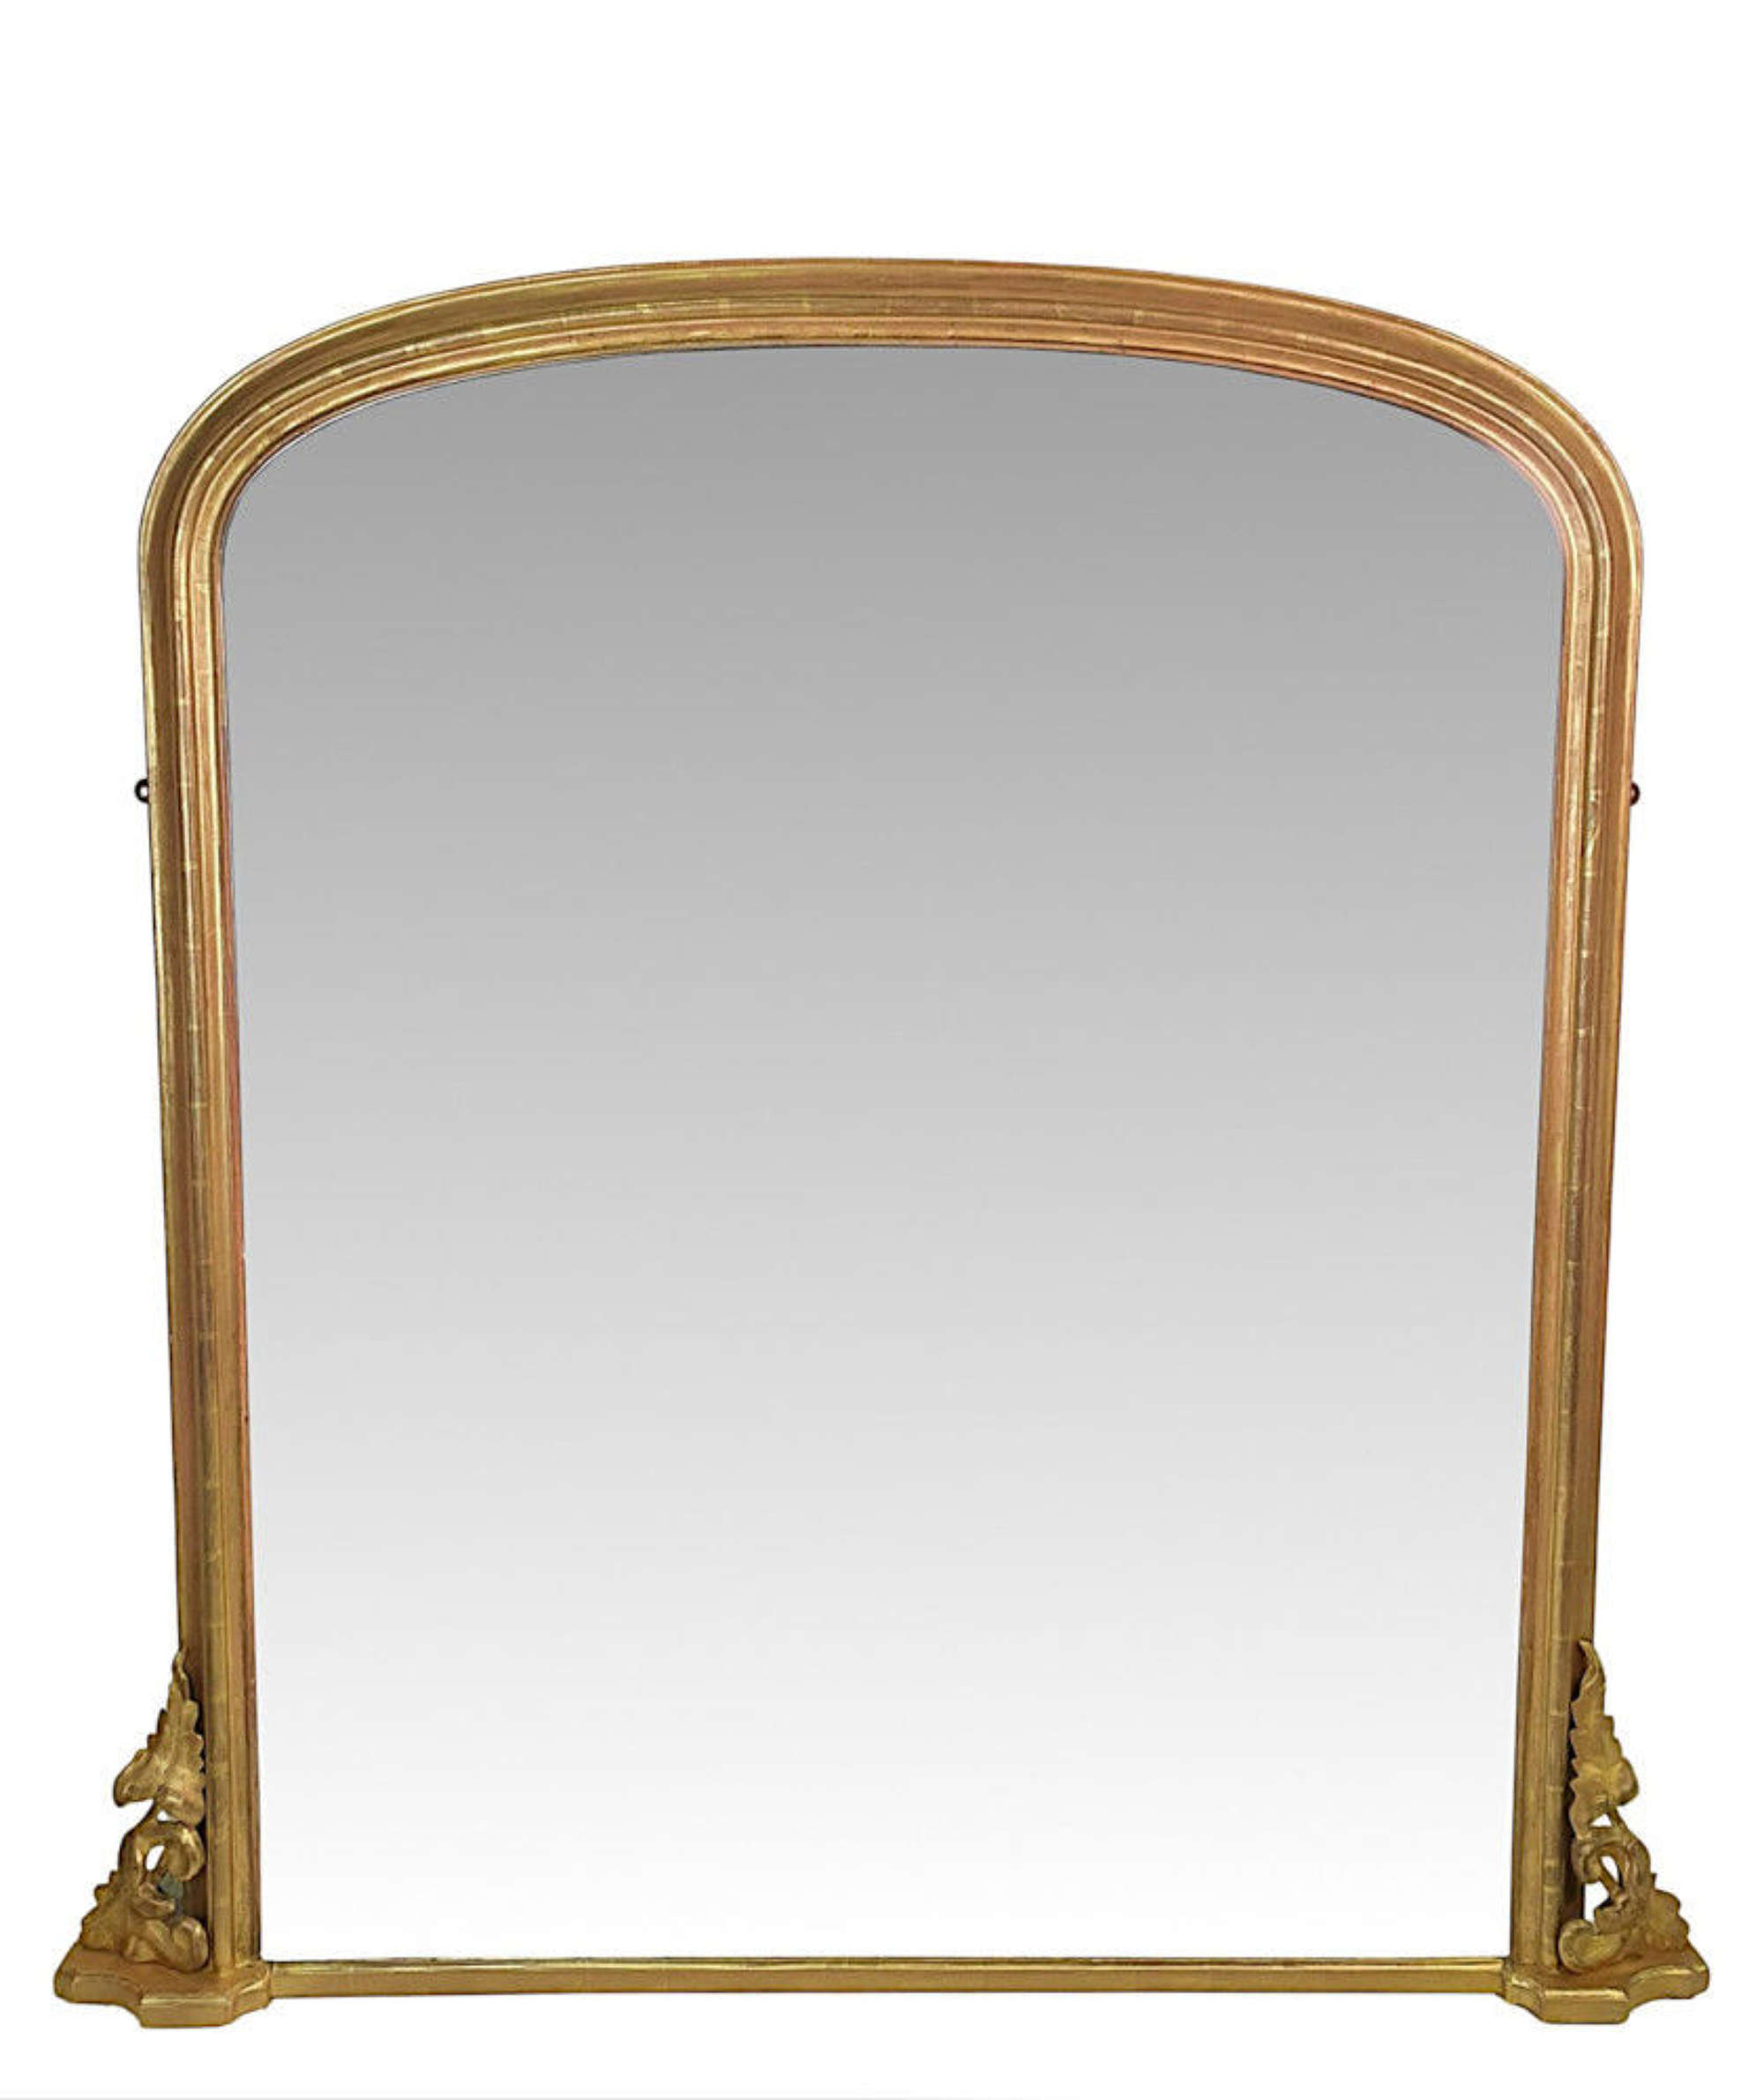 A Beautiful 19th Century Archtop Gilt Wood Antique Overmantle Mirror